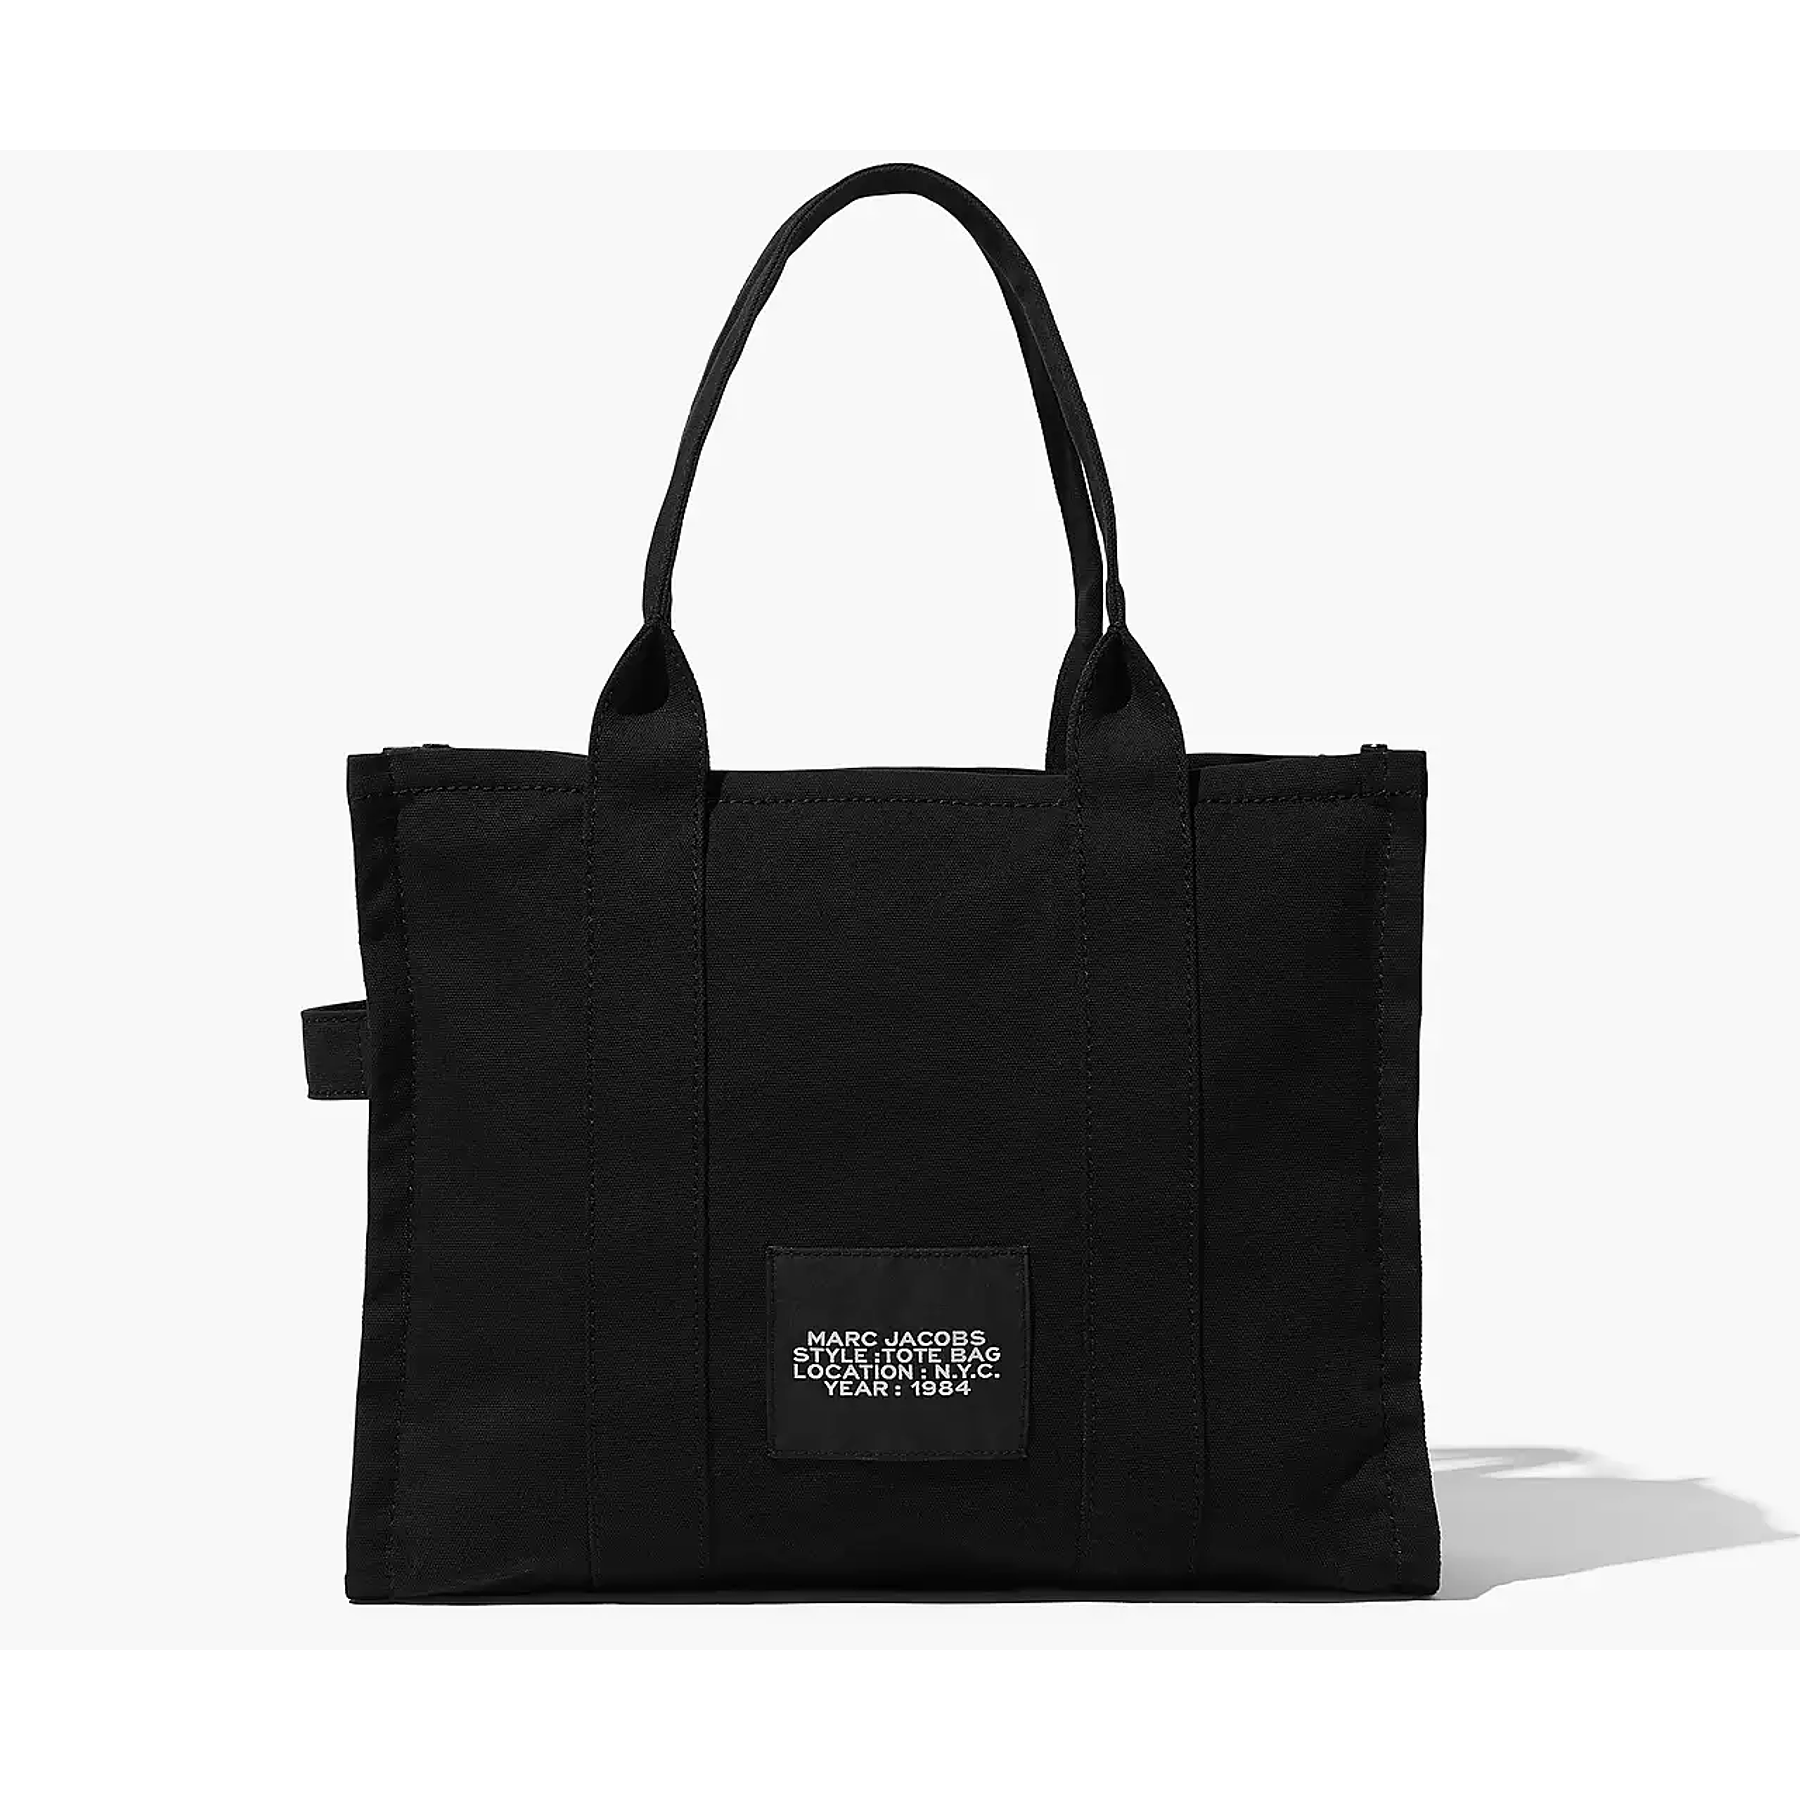 The Tote Bag Large Canvas Black